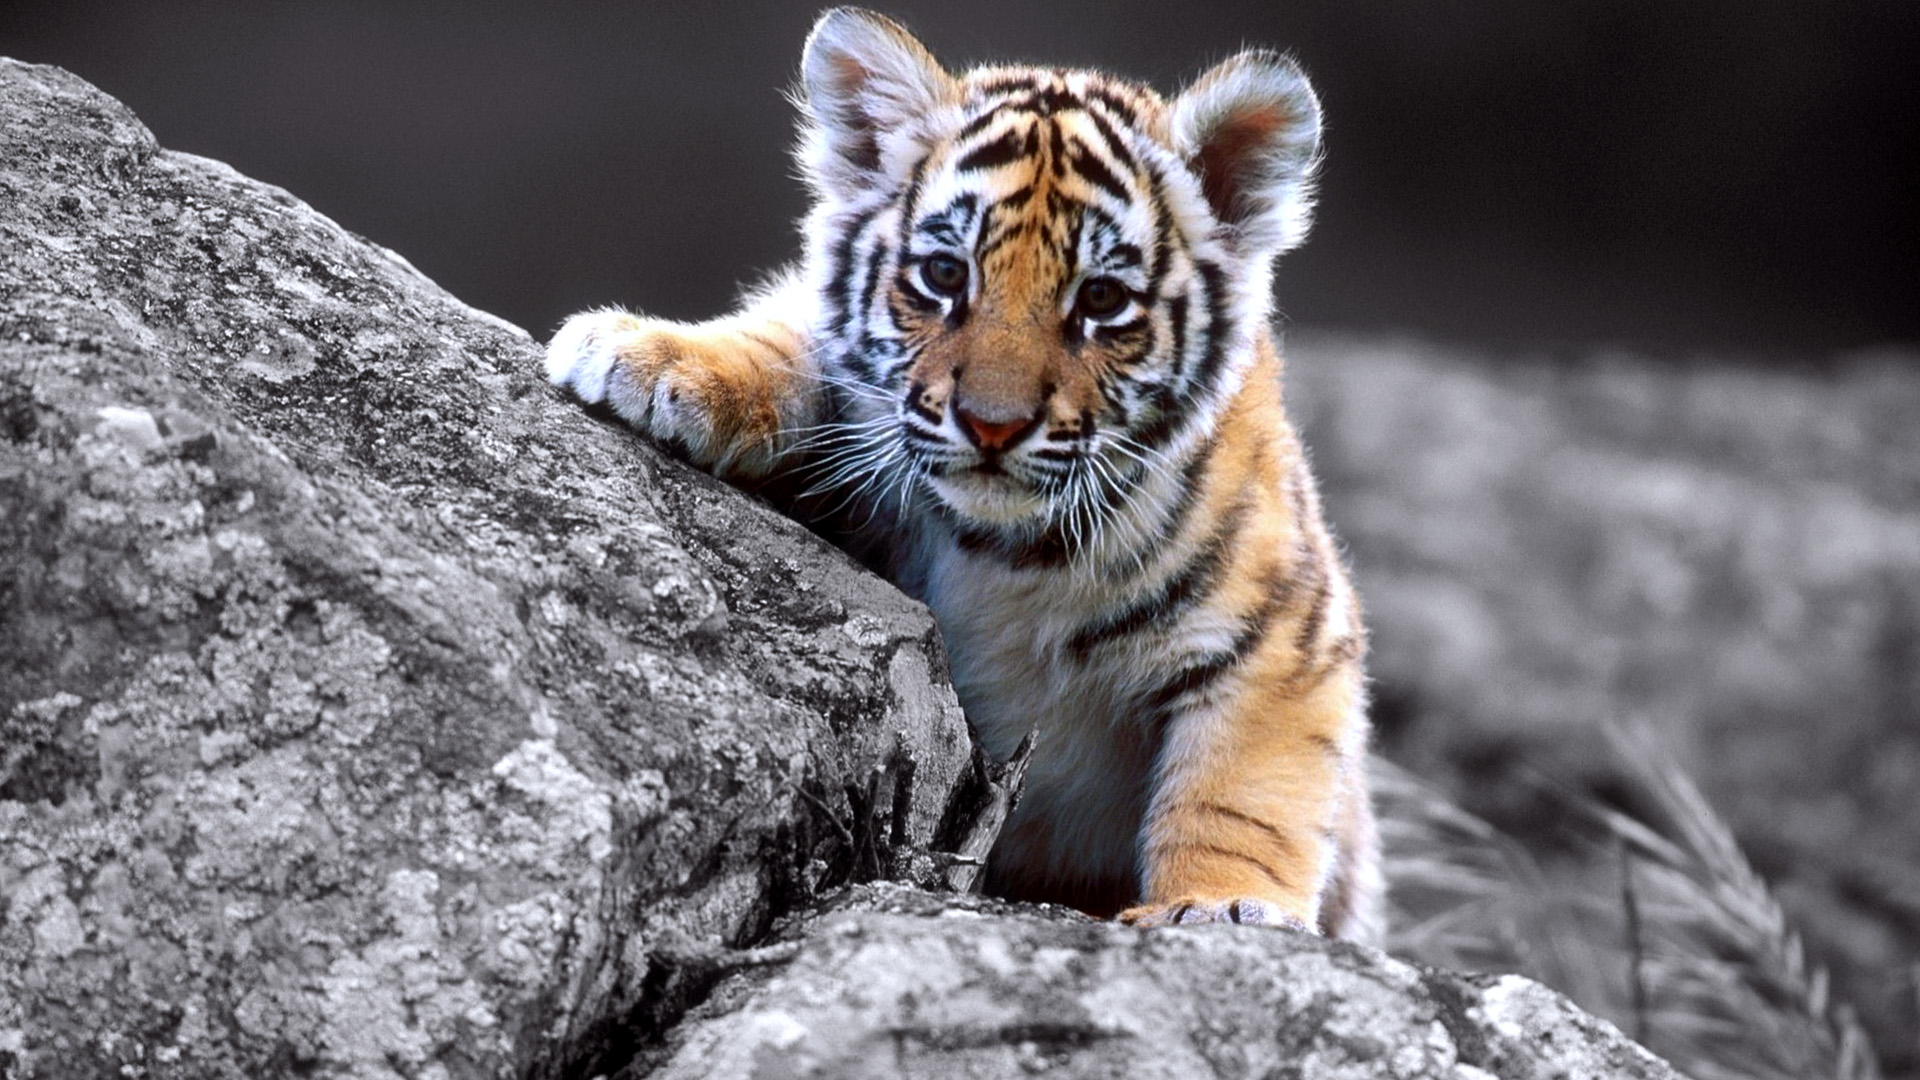  Cute  Baby  Tiger  Full Wallpapers  HD  Desktop and Mobile 